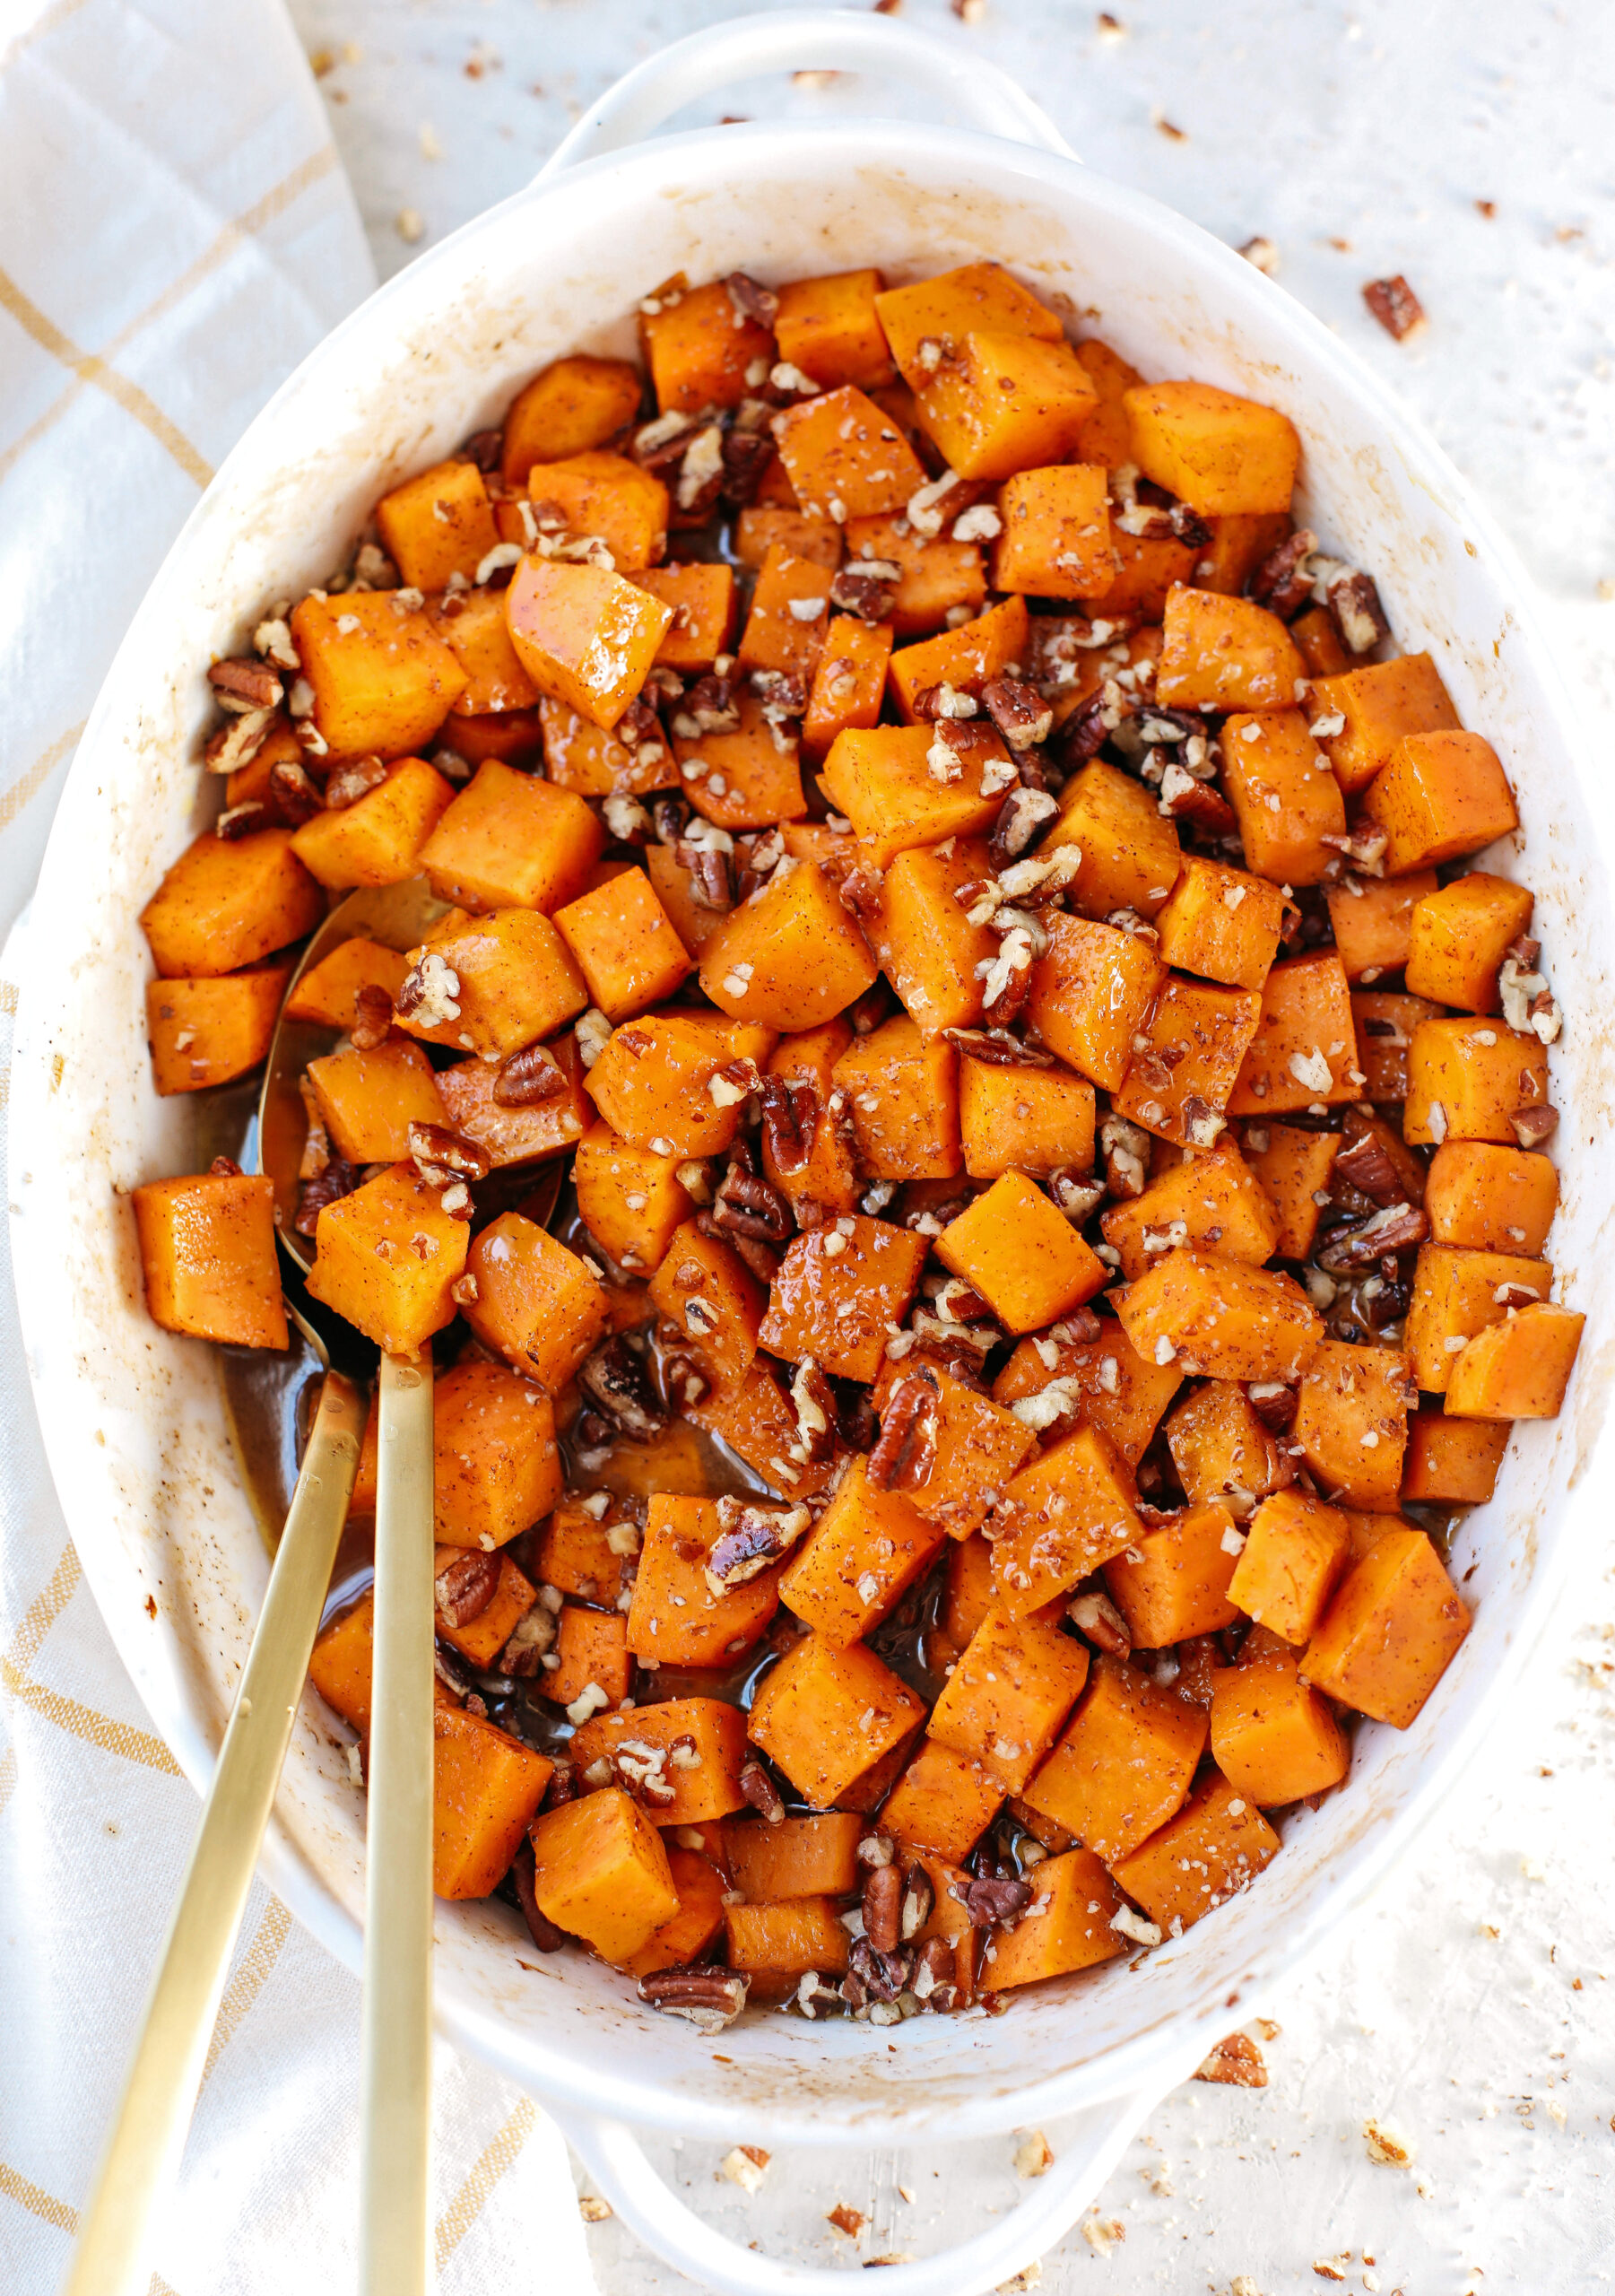 These Bourbon Maple Pecan Sweet Potatoes are one of my favorite holiday side dishes coated in the most delicious maple cinnamon glaze that will keep you coming back for seconds!